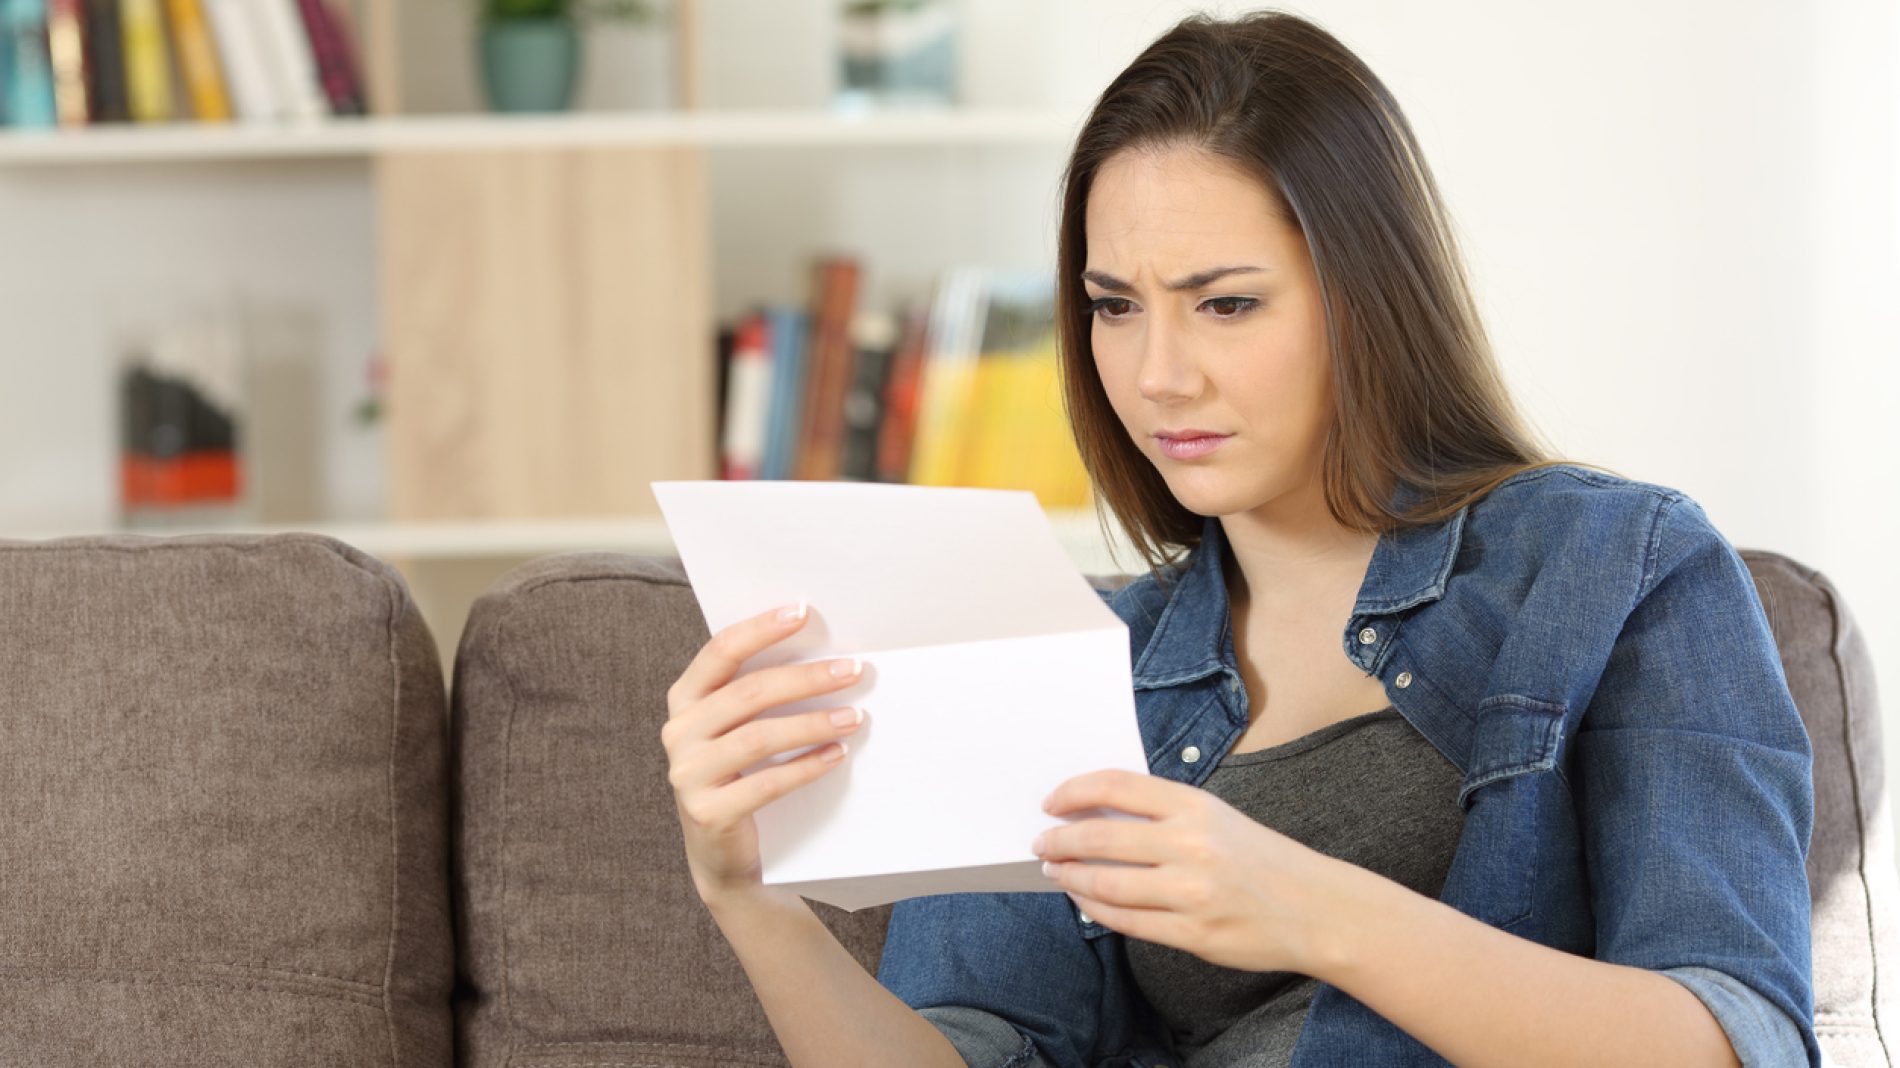 Worried woman reading a letter at home